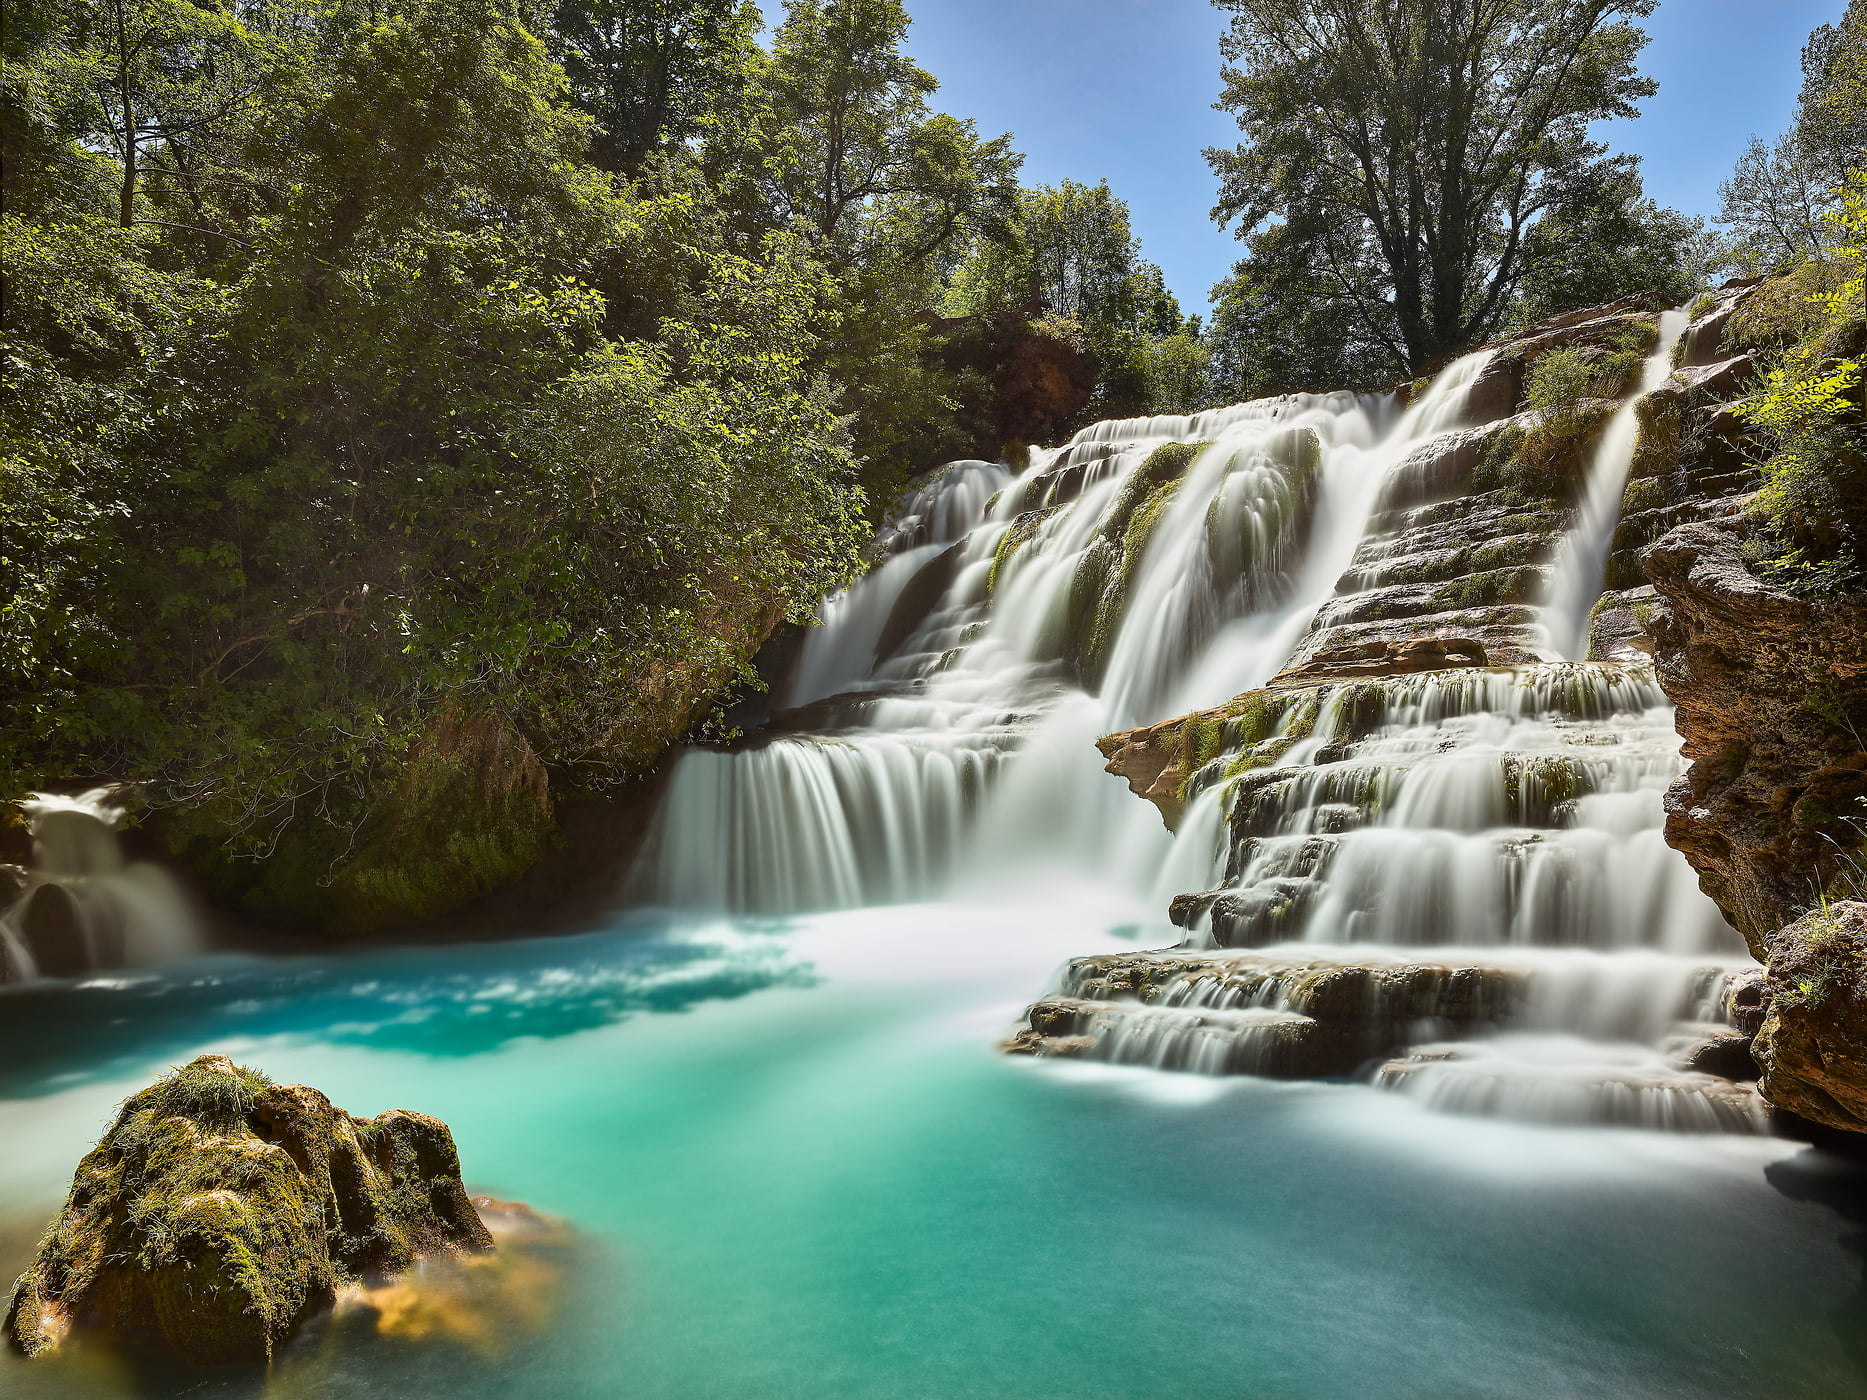 180 megapixels! A very high resolution, big photo print of a waterfall with trees and rocks; nature photograph created by David Meaux in Cascade de Navacelles, Navacelles, l'Hérault, France.